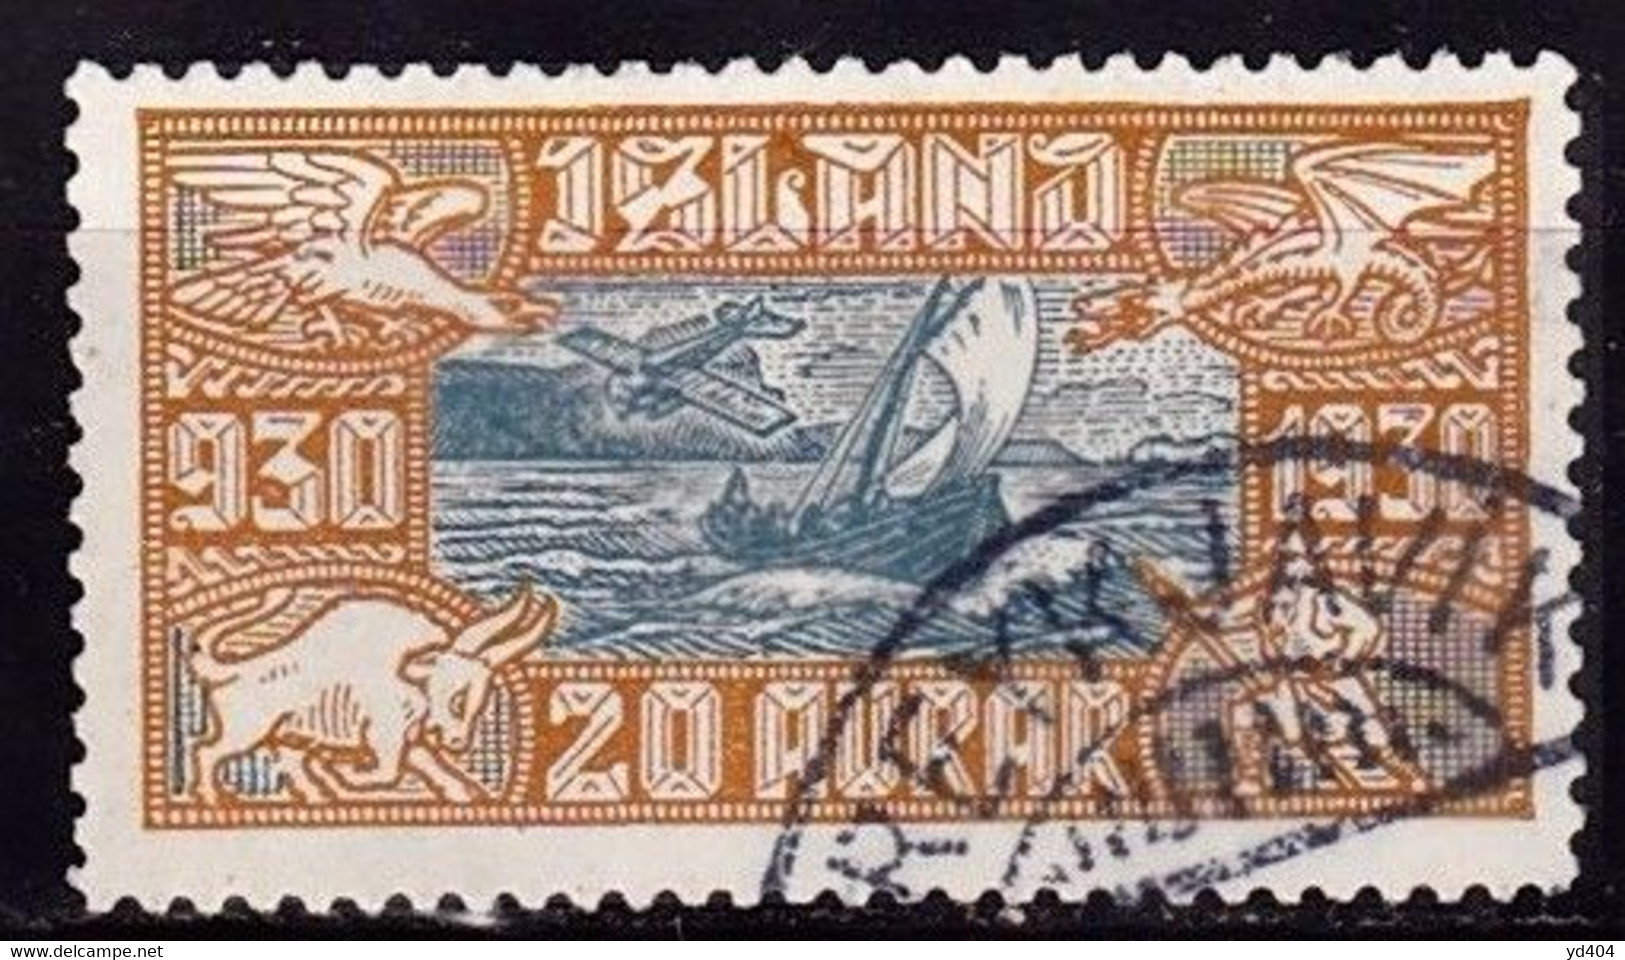 IS313 – ISLANDE – ICELAND – 1930 – PARLIAMENT MILLENARY – SG # 175 USED 59 € - Airmail